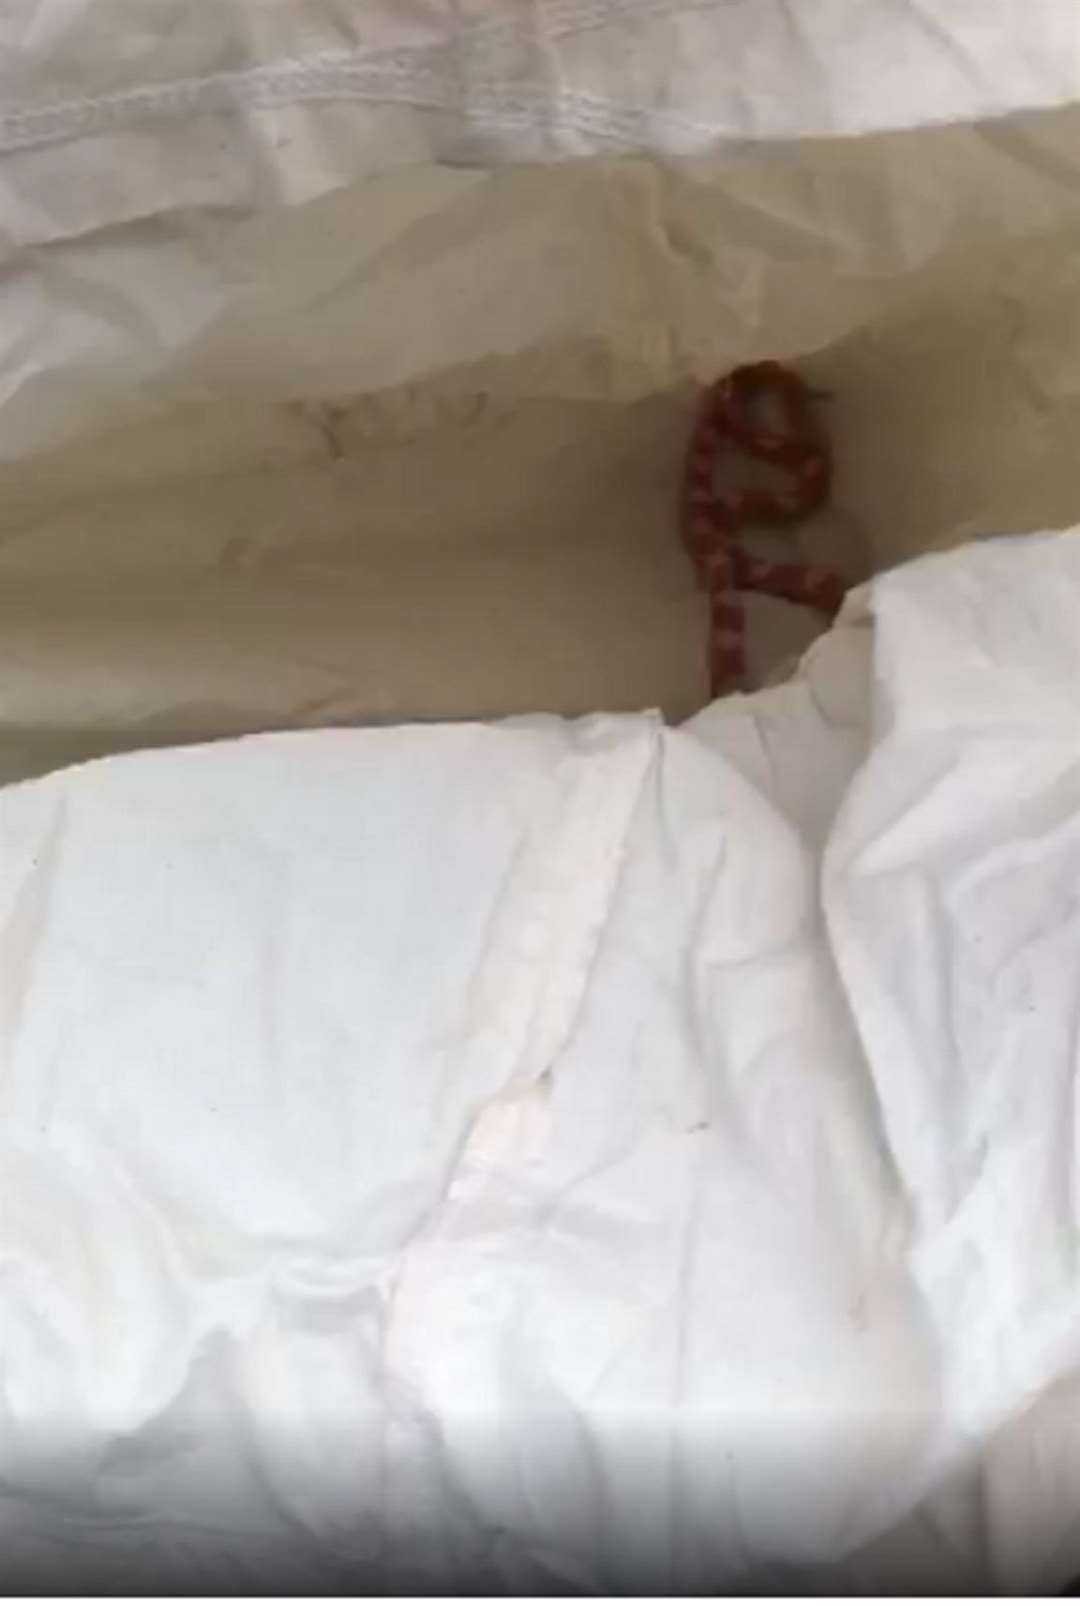 The RSPCA were called out to the home in Leeds after the corn snake was discovered (RSPCA/PA)